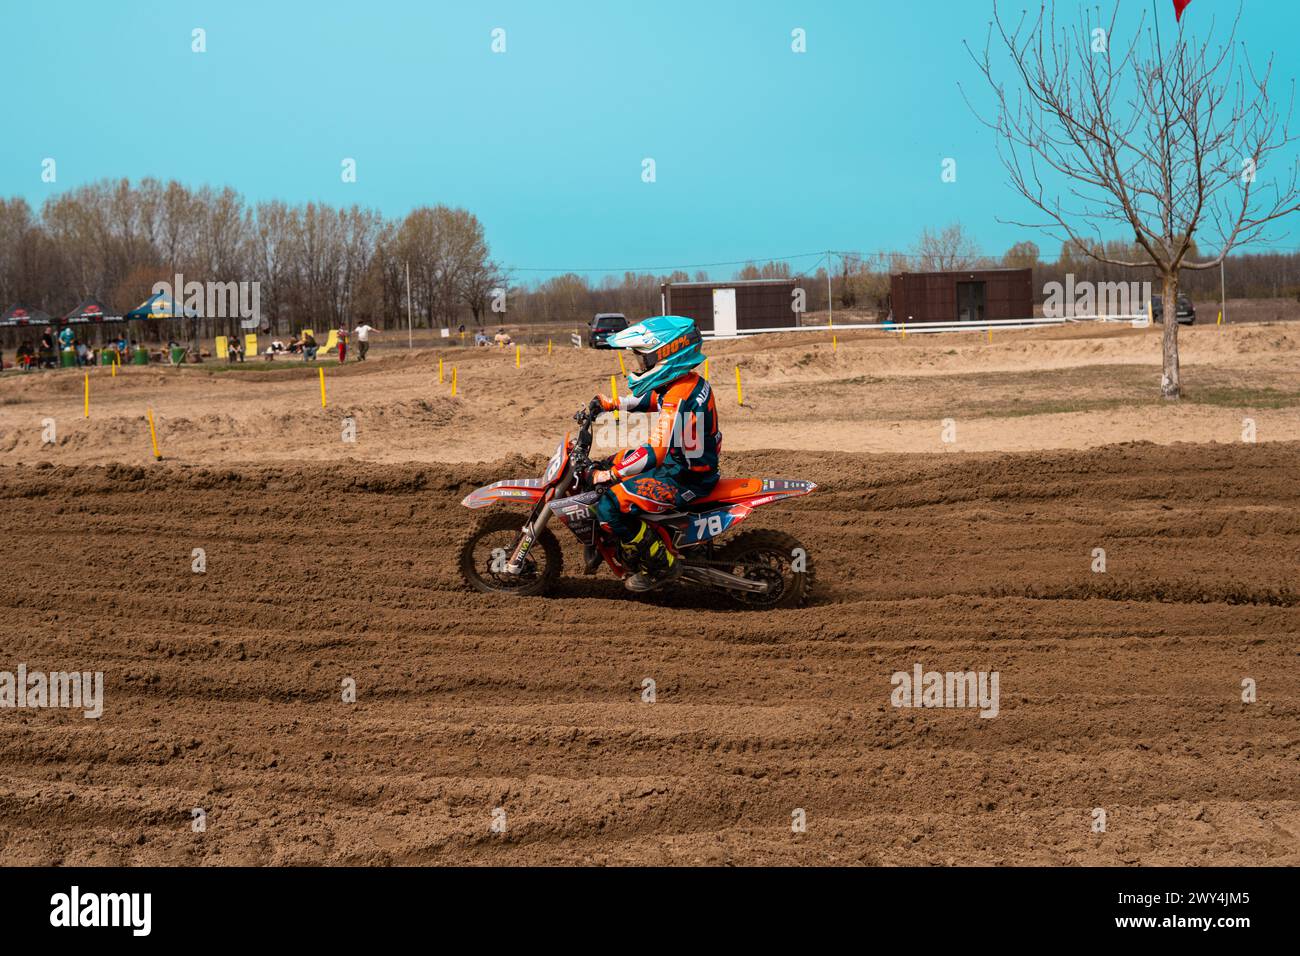 Motocross competition Stock Photo